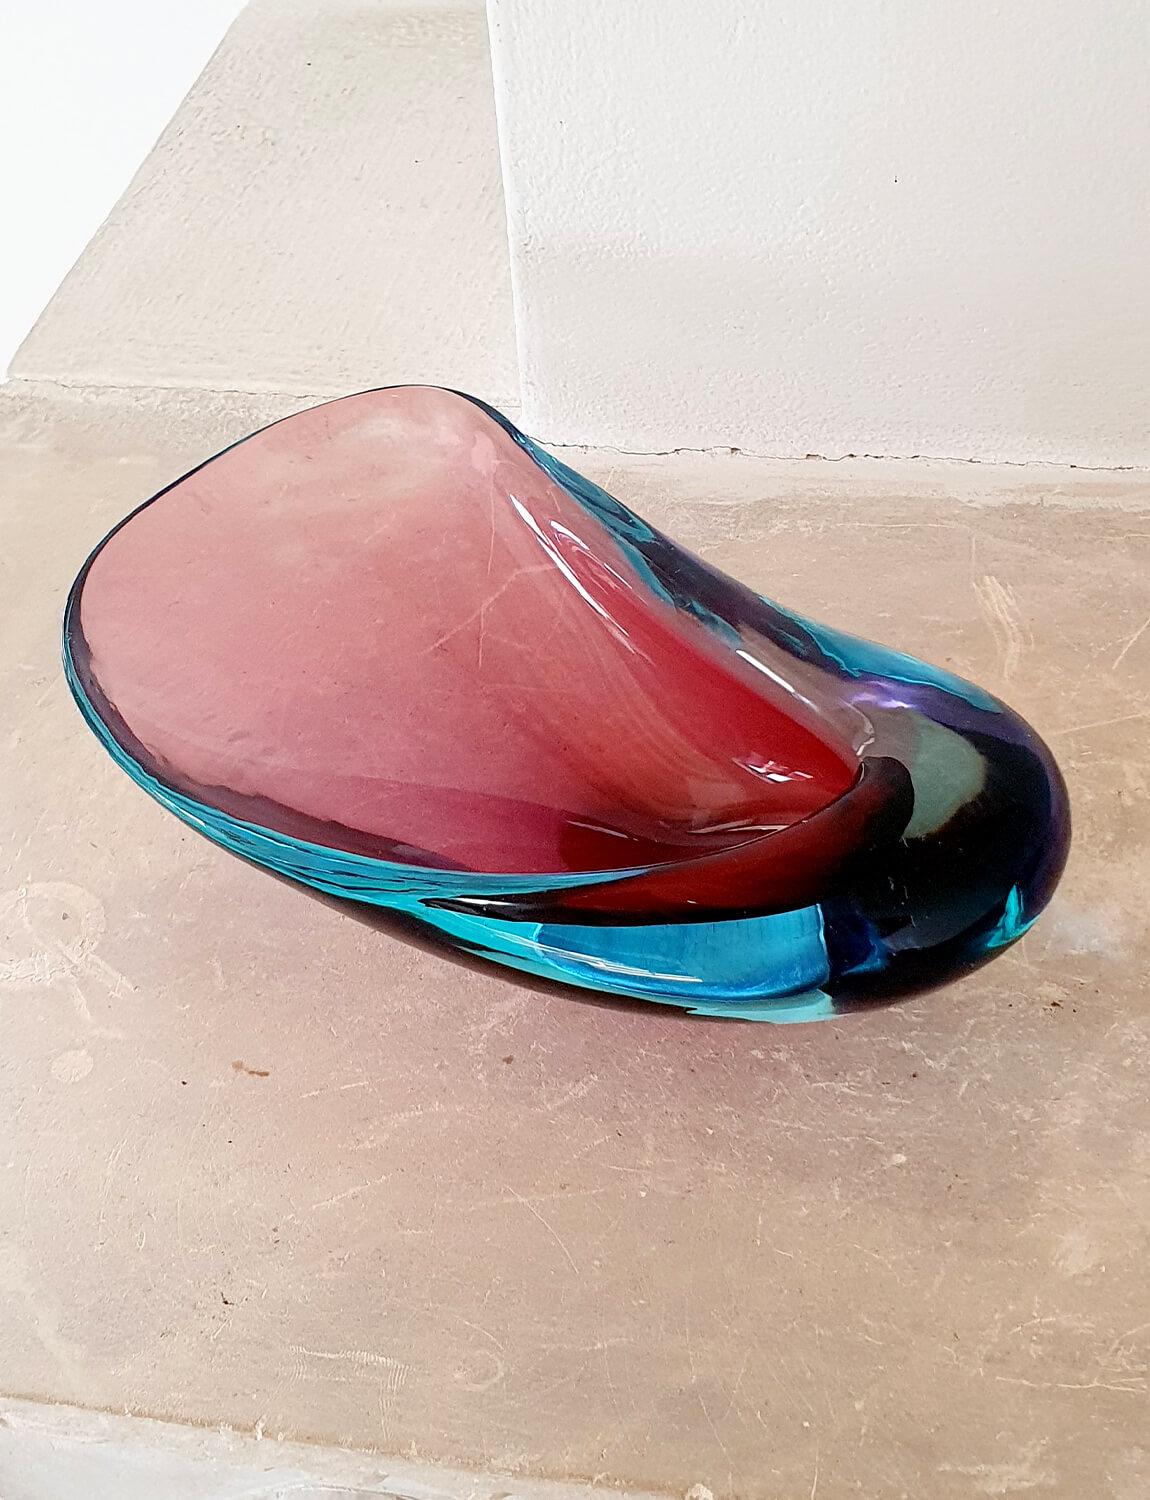 A beautiful 'Sommerso' Murano glass bowl formed in the shape of a large shell with pink central core surrounded in blue glass. This piece is by the Venetian designer, Flavio Poli and was found here in Italy. Sommerso literally translates as